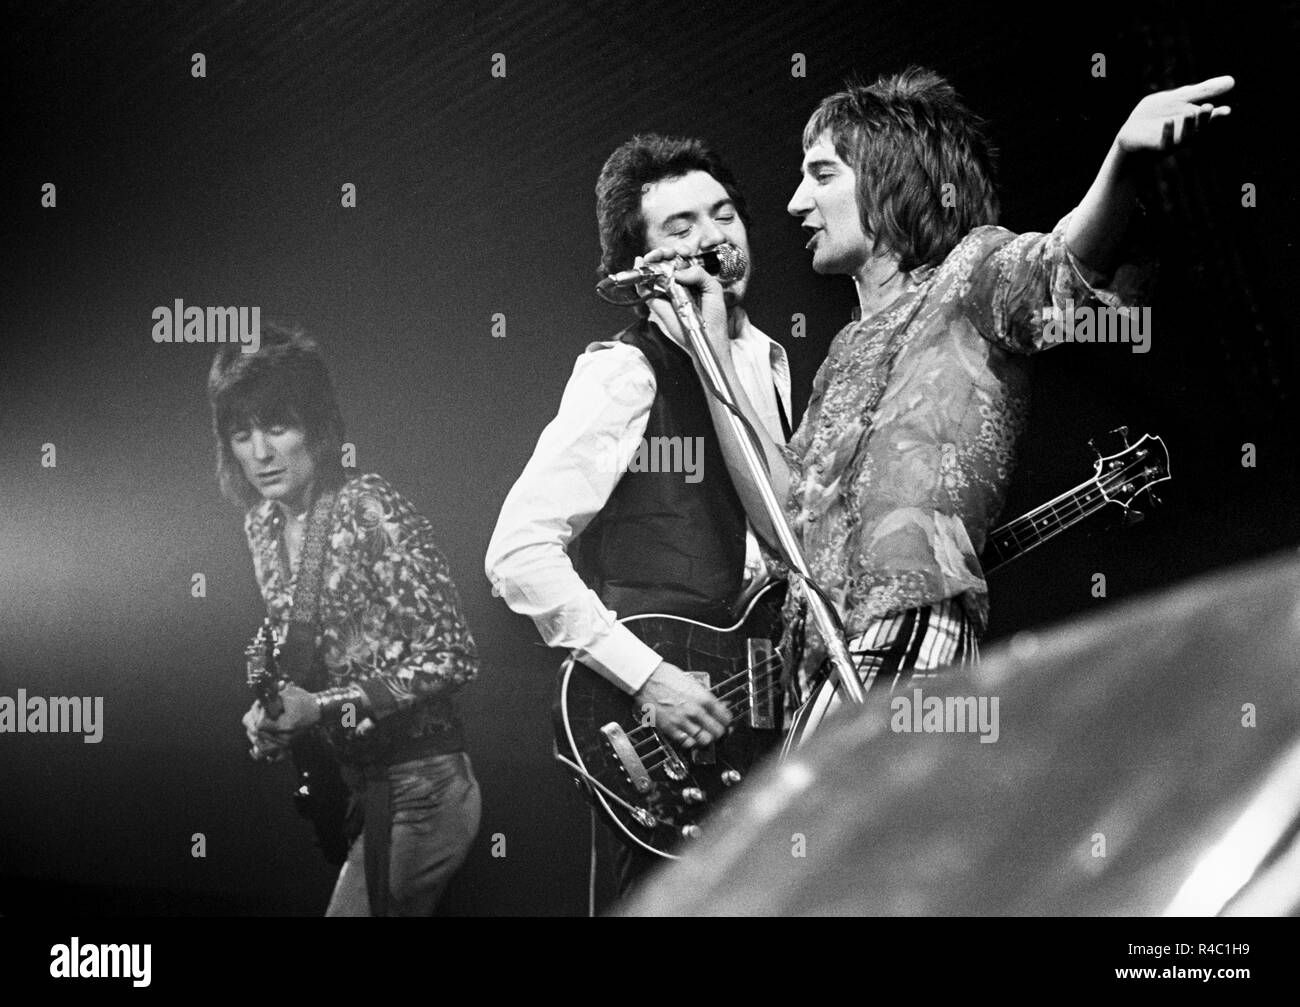 Rod Stewart of the Faces with Ronnie Wood and Ronnie Lane perform on stage  on the Pop Gala TV show on 10th March 1973 in the Netherlands. L-R Ronnie  Wood, Ronnie Lane,